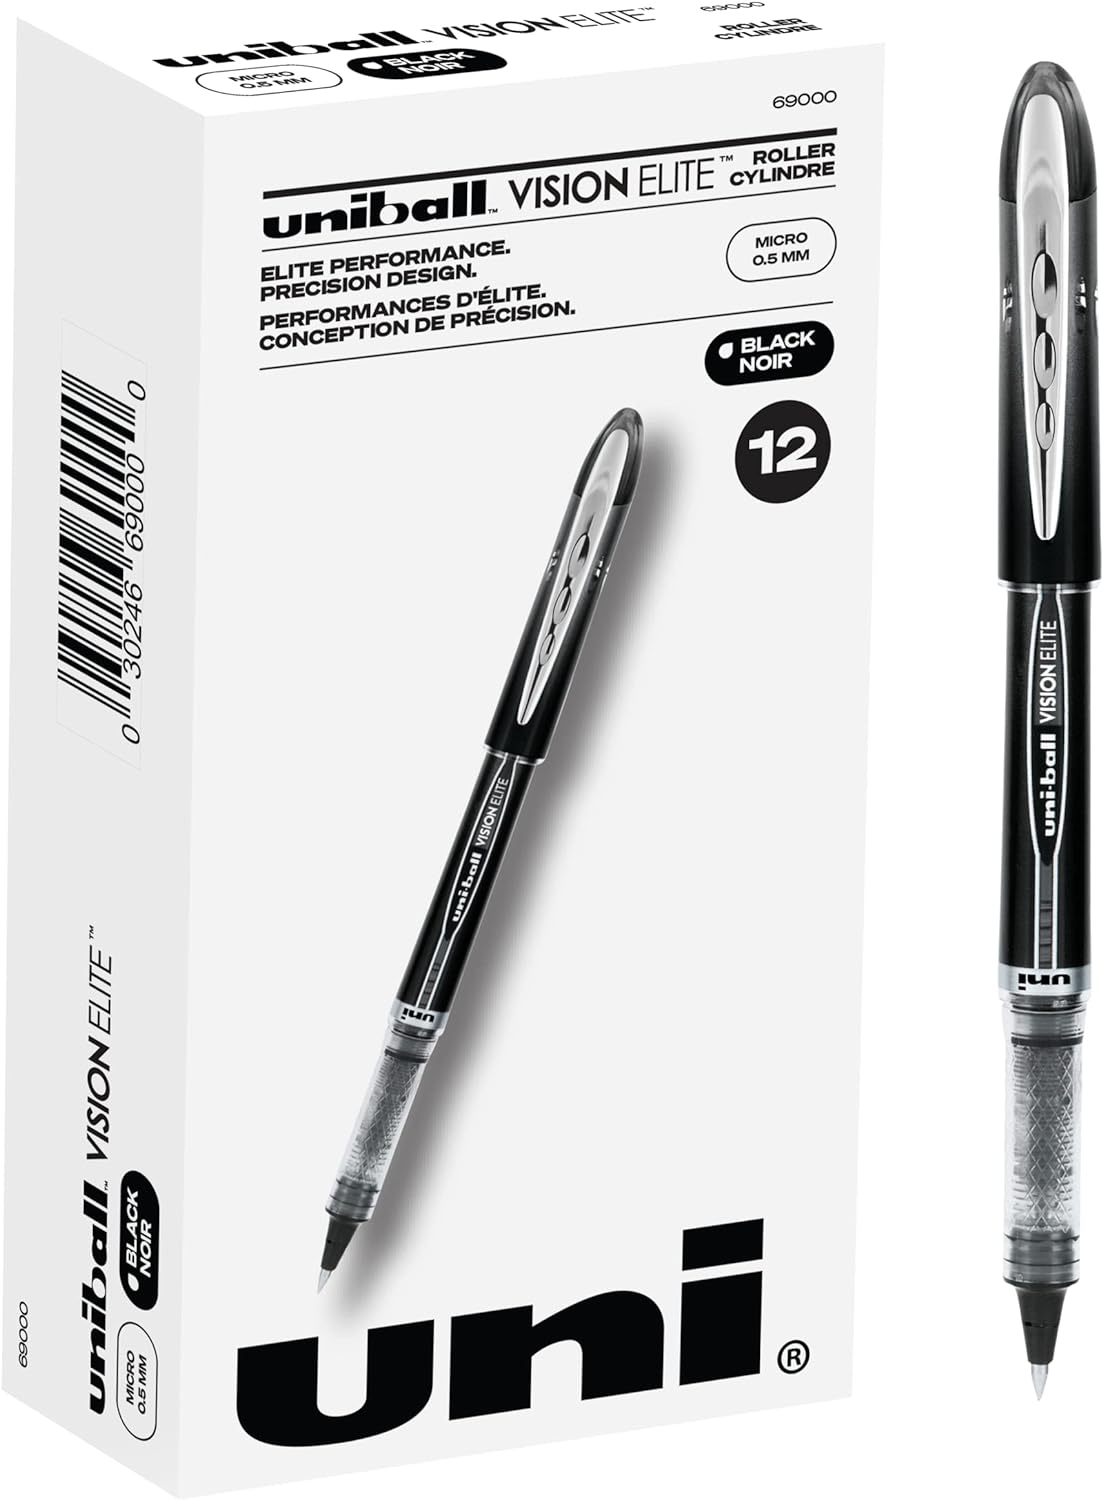 [S&S] $11.96: uniball Vision Elite Rollerball Pens with 0.5mm Fine Point Micro Tip, Black, 12 Count @ Amazon